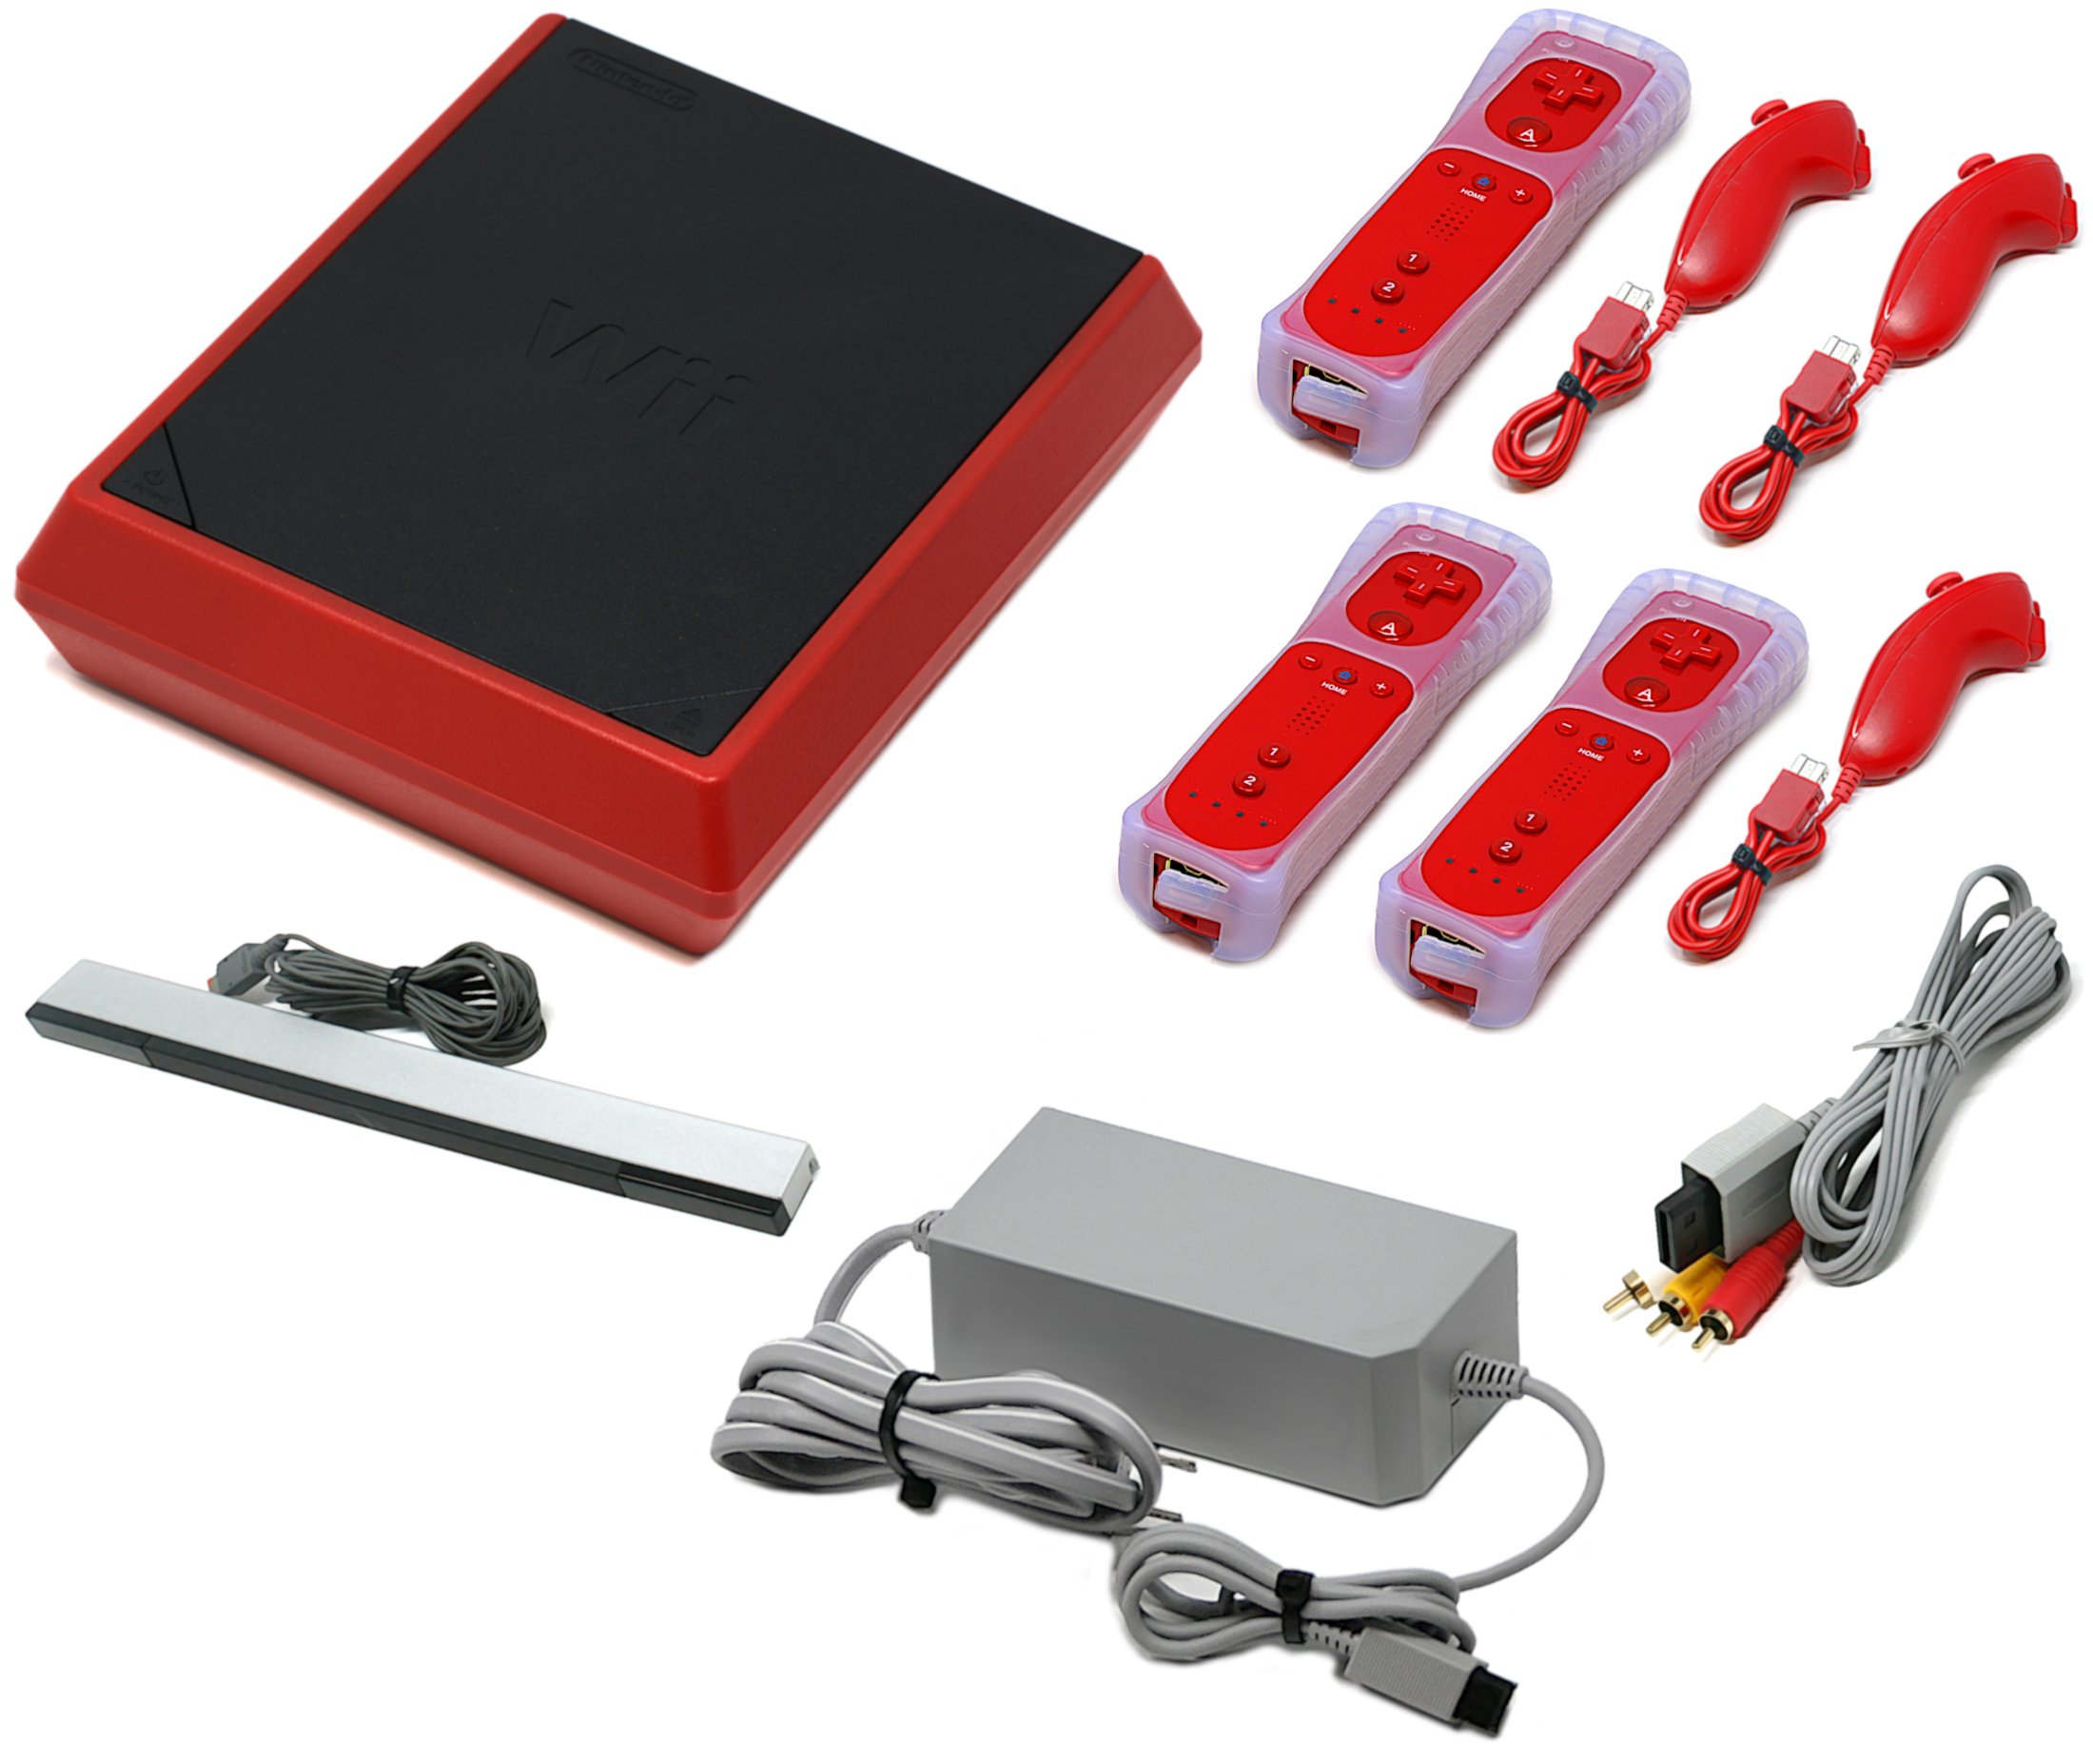 Authentic Red Wii Mini Console + Cords + Pick Controllers + US Seller